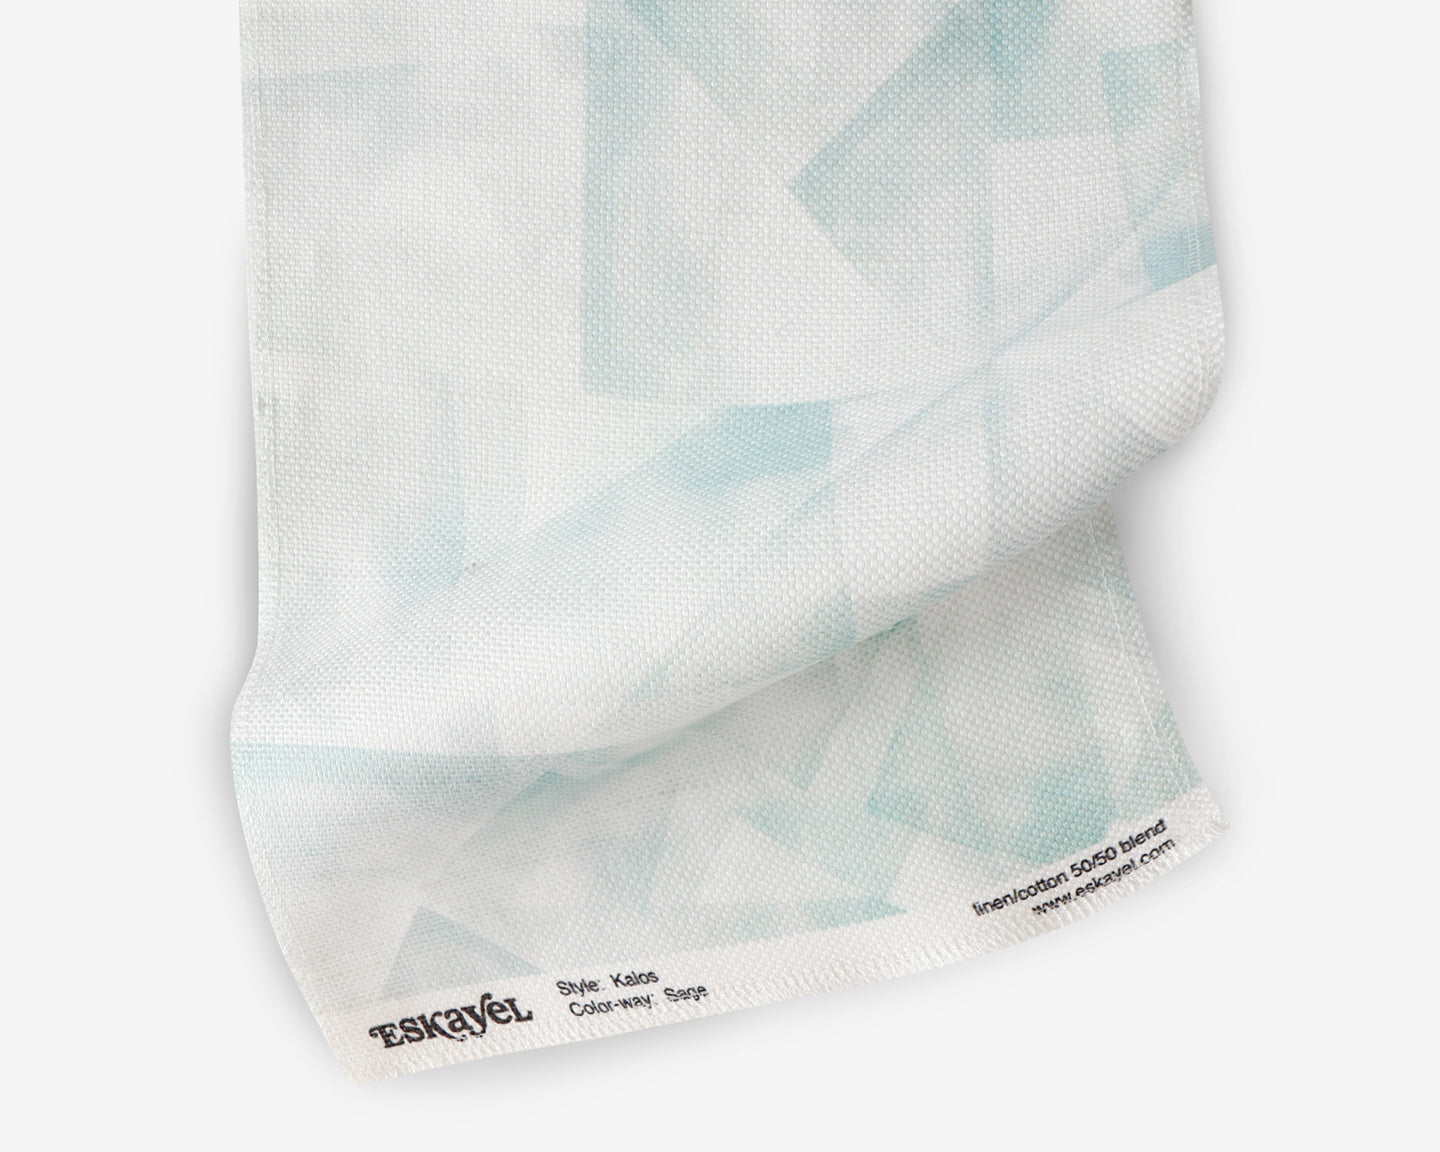 A tea fabric with a blue and white geometric pattern